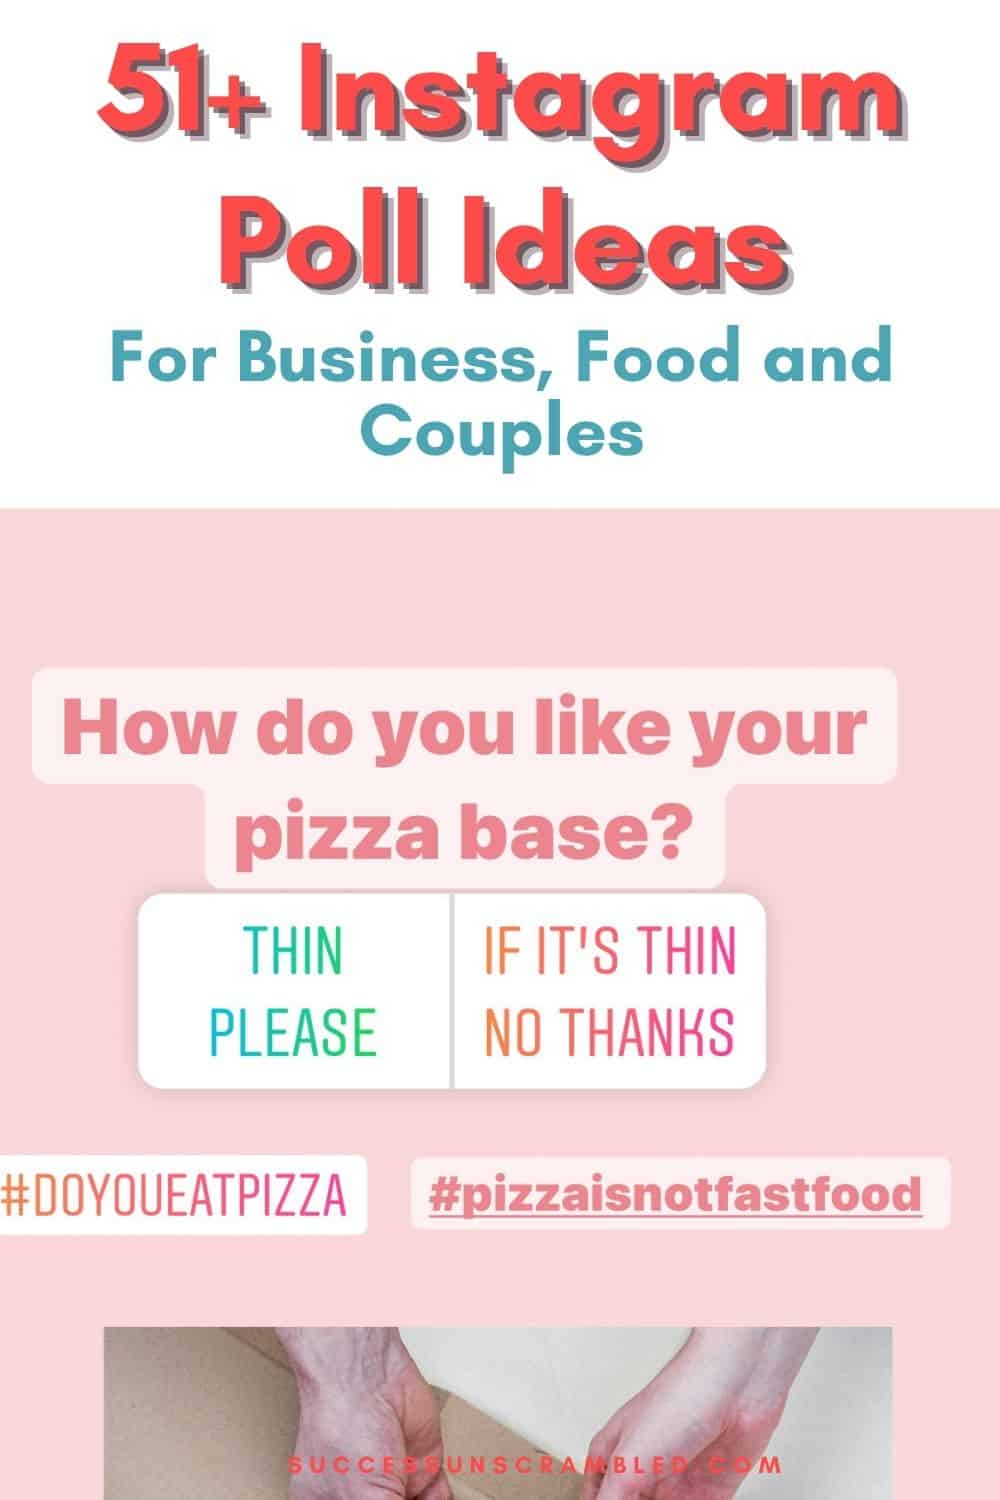 51+ Instagram Poll Ideas For Business, Food, and Couples